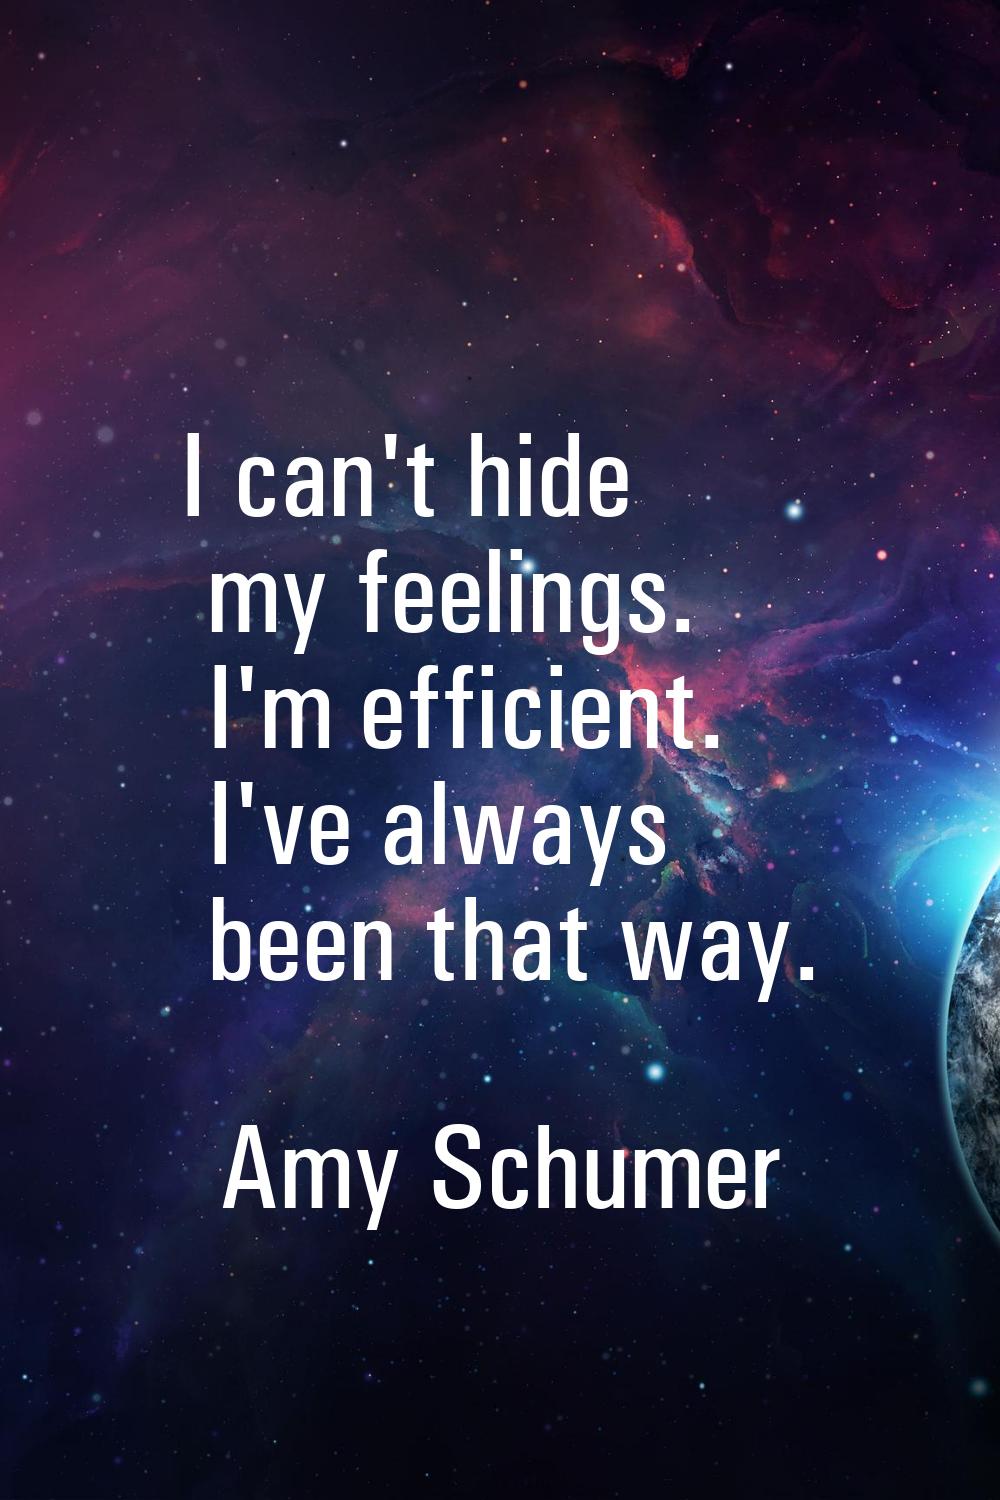 I can't hide my feelings. I'm efficient. I've always been that way.